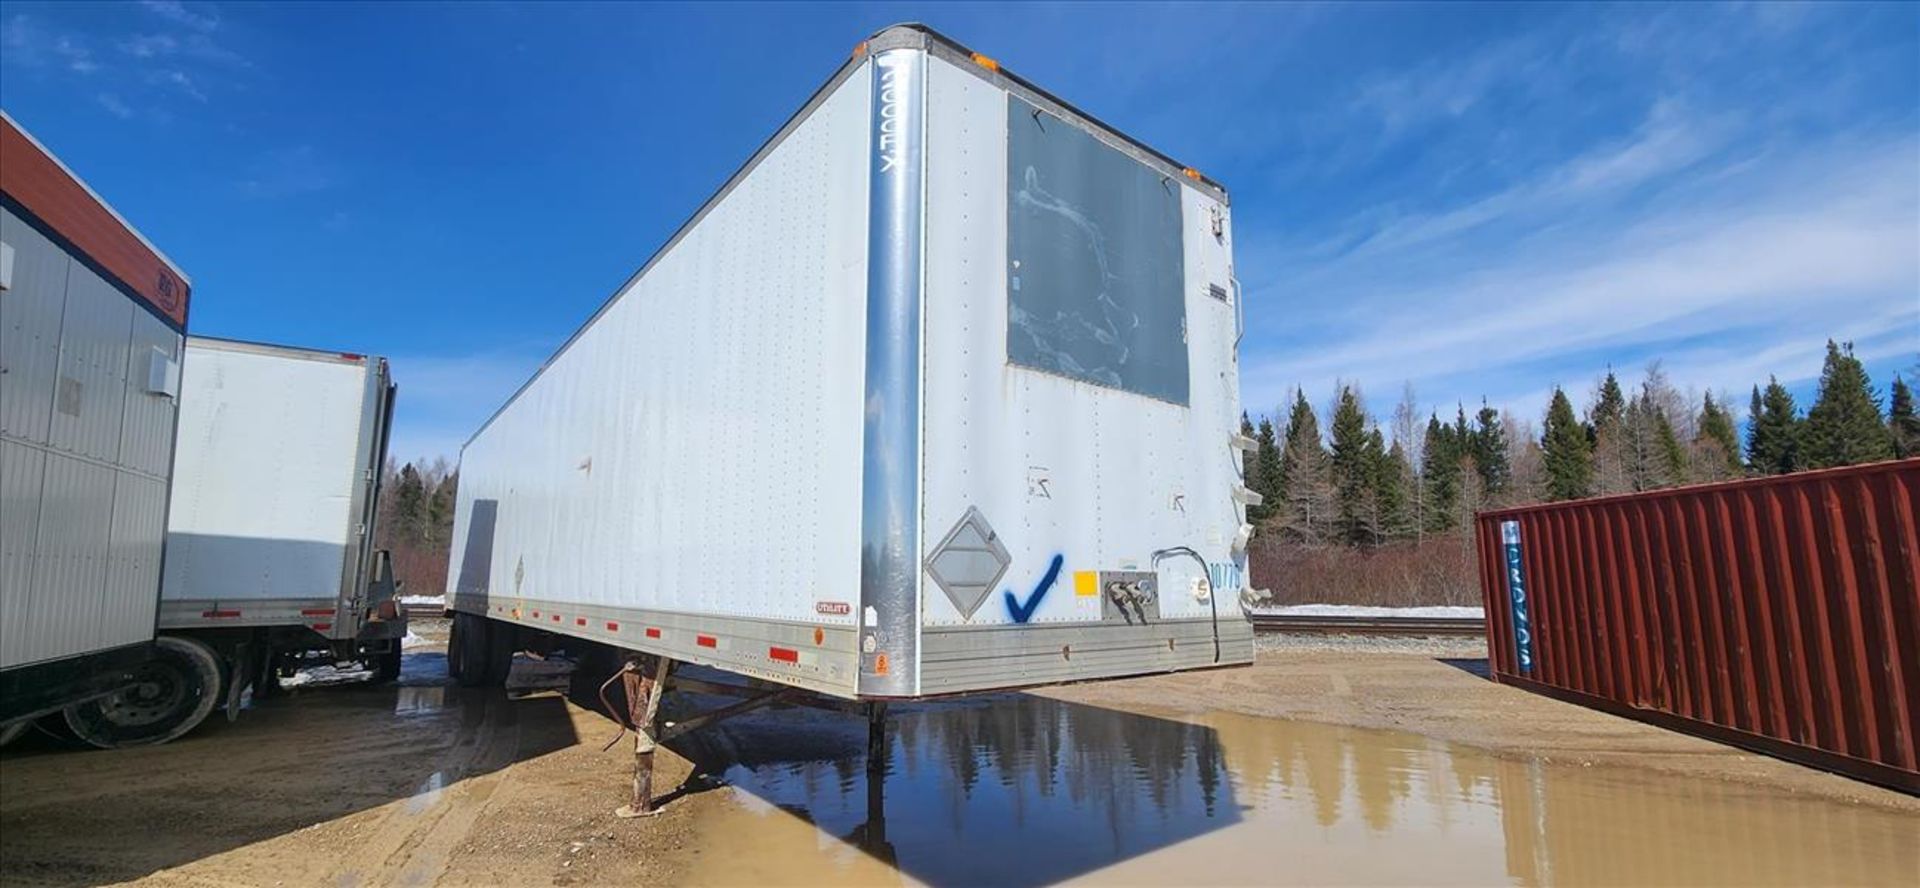 Utility hwy trailer, mod. 2000RX, VIN 1UYVS2486RM084506, 53 ft., T/A, aluminum deck, barn-doors ( - Image 2 of 5